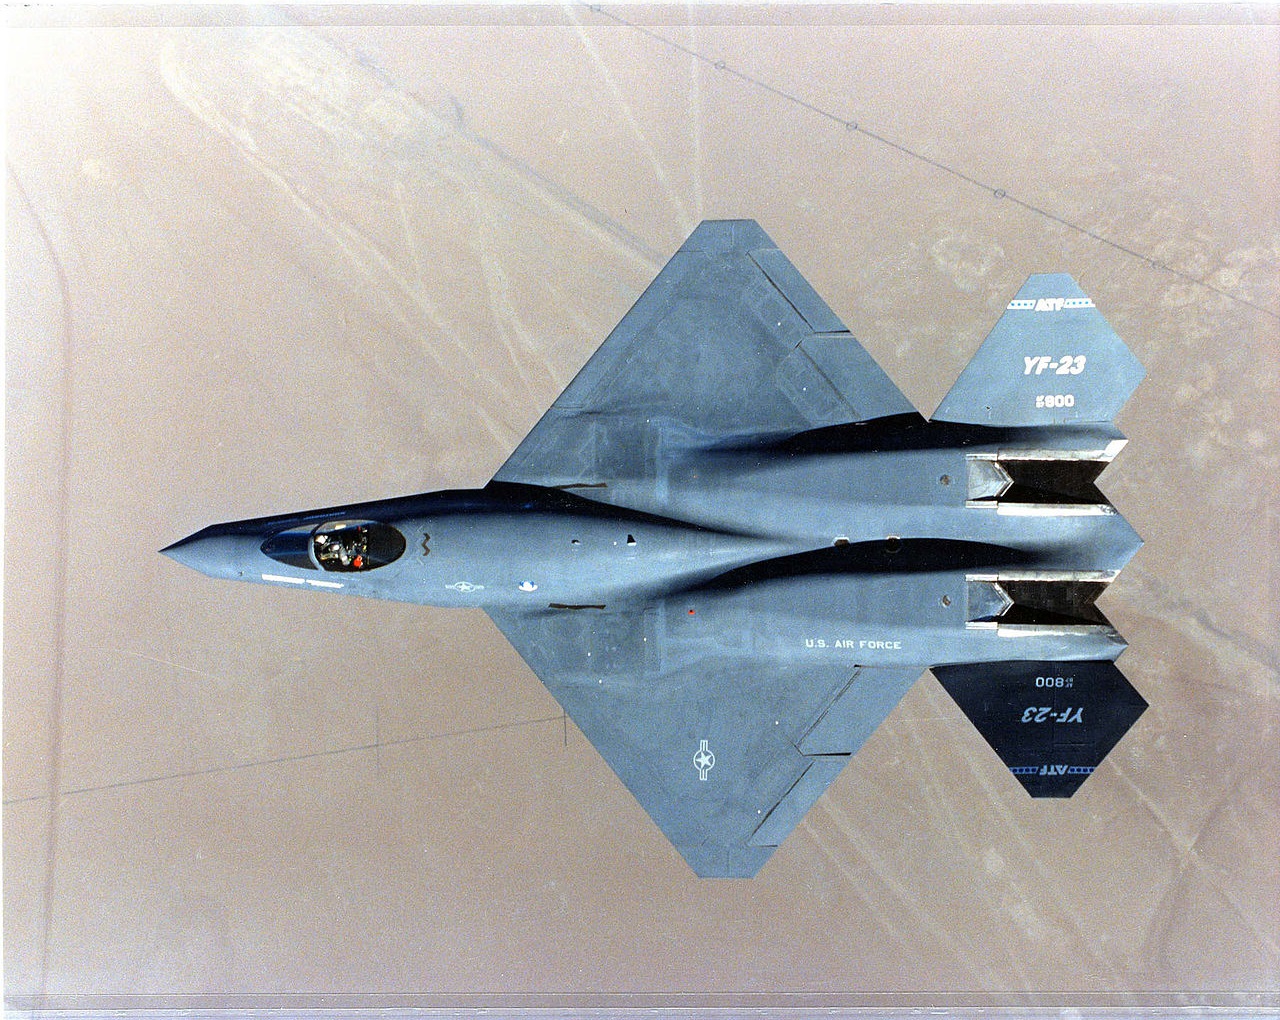 The F 23 Stealth Fighter A Super Weapon America Should Have Built And Not The F 22 Raptor The National Interest